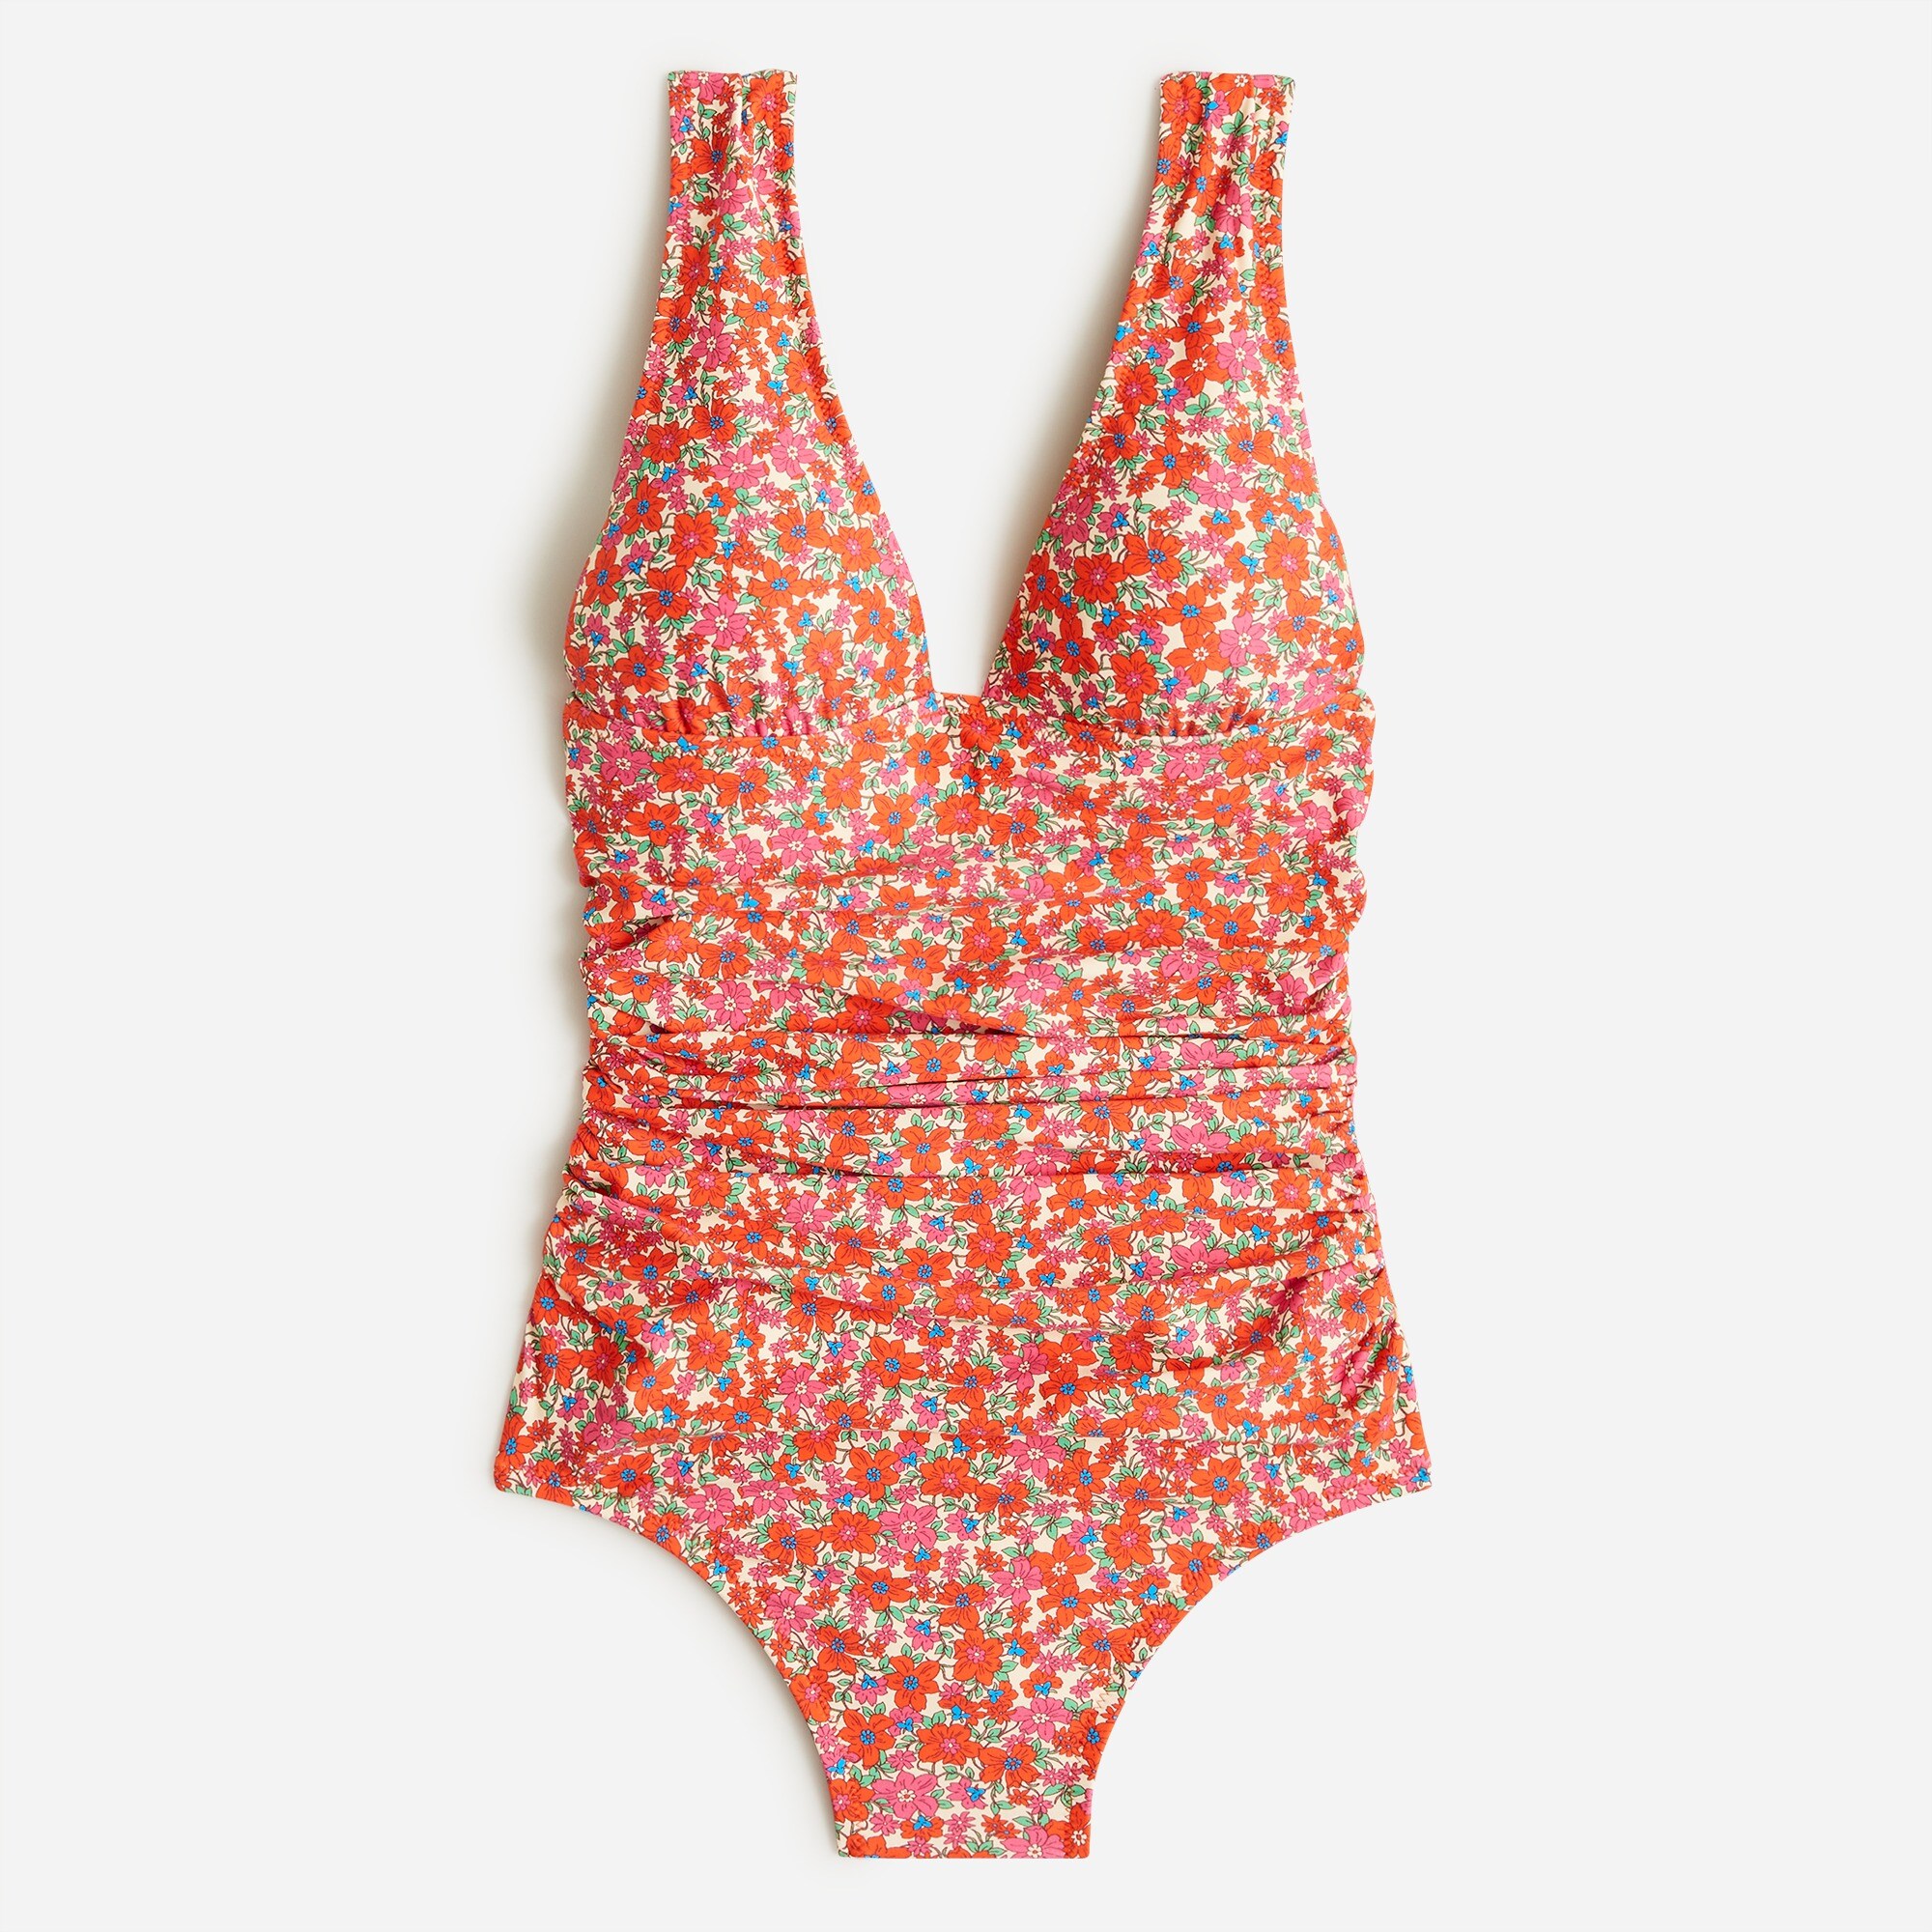  Ruched V-neck one-piece swimsuit in brilliant blooms